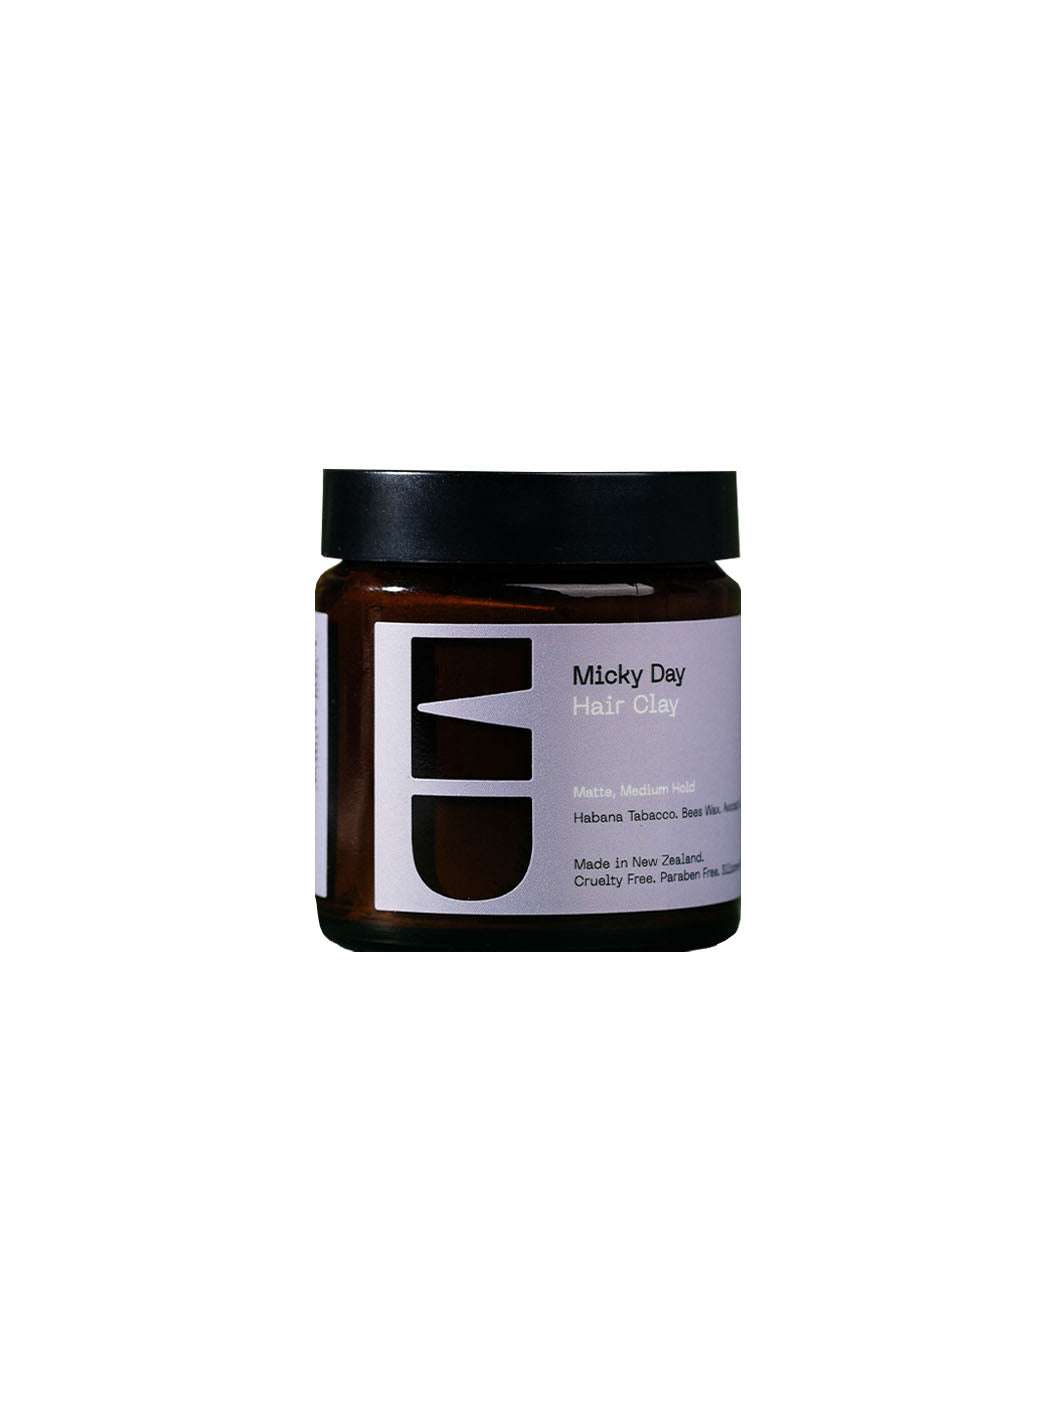 Micky Day - Hair Clay